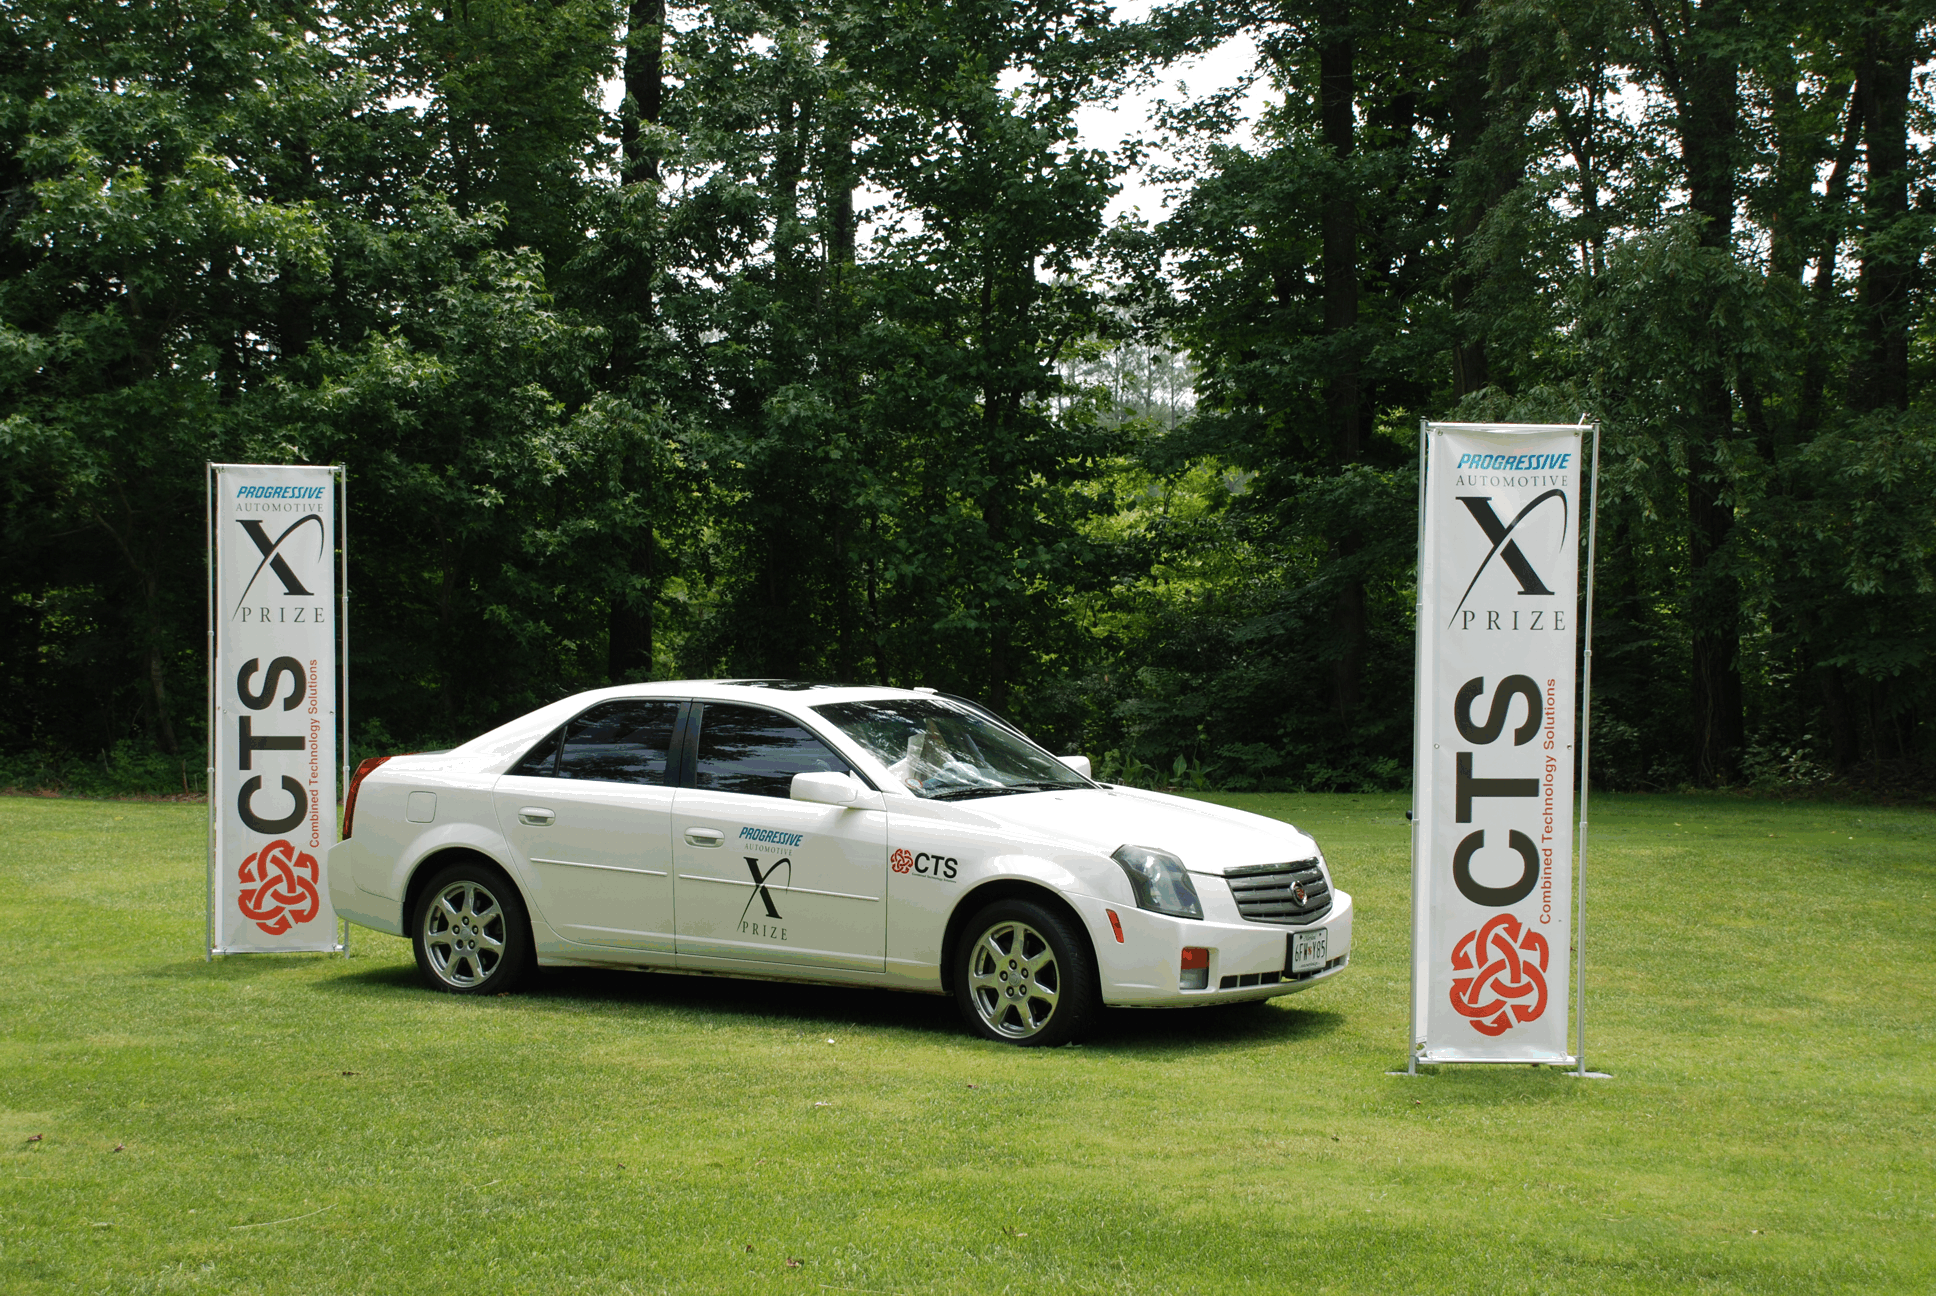 CTS Dynamic Spark Ignition X Prize Cadillac